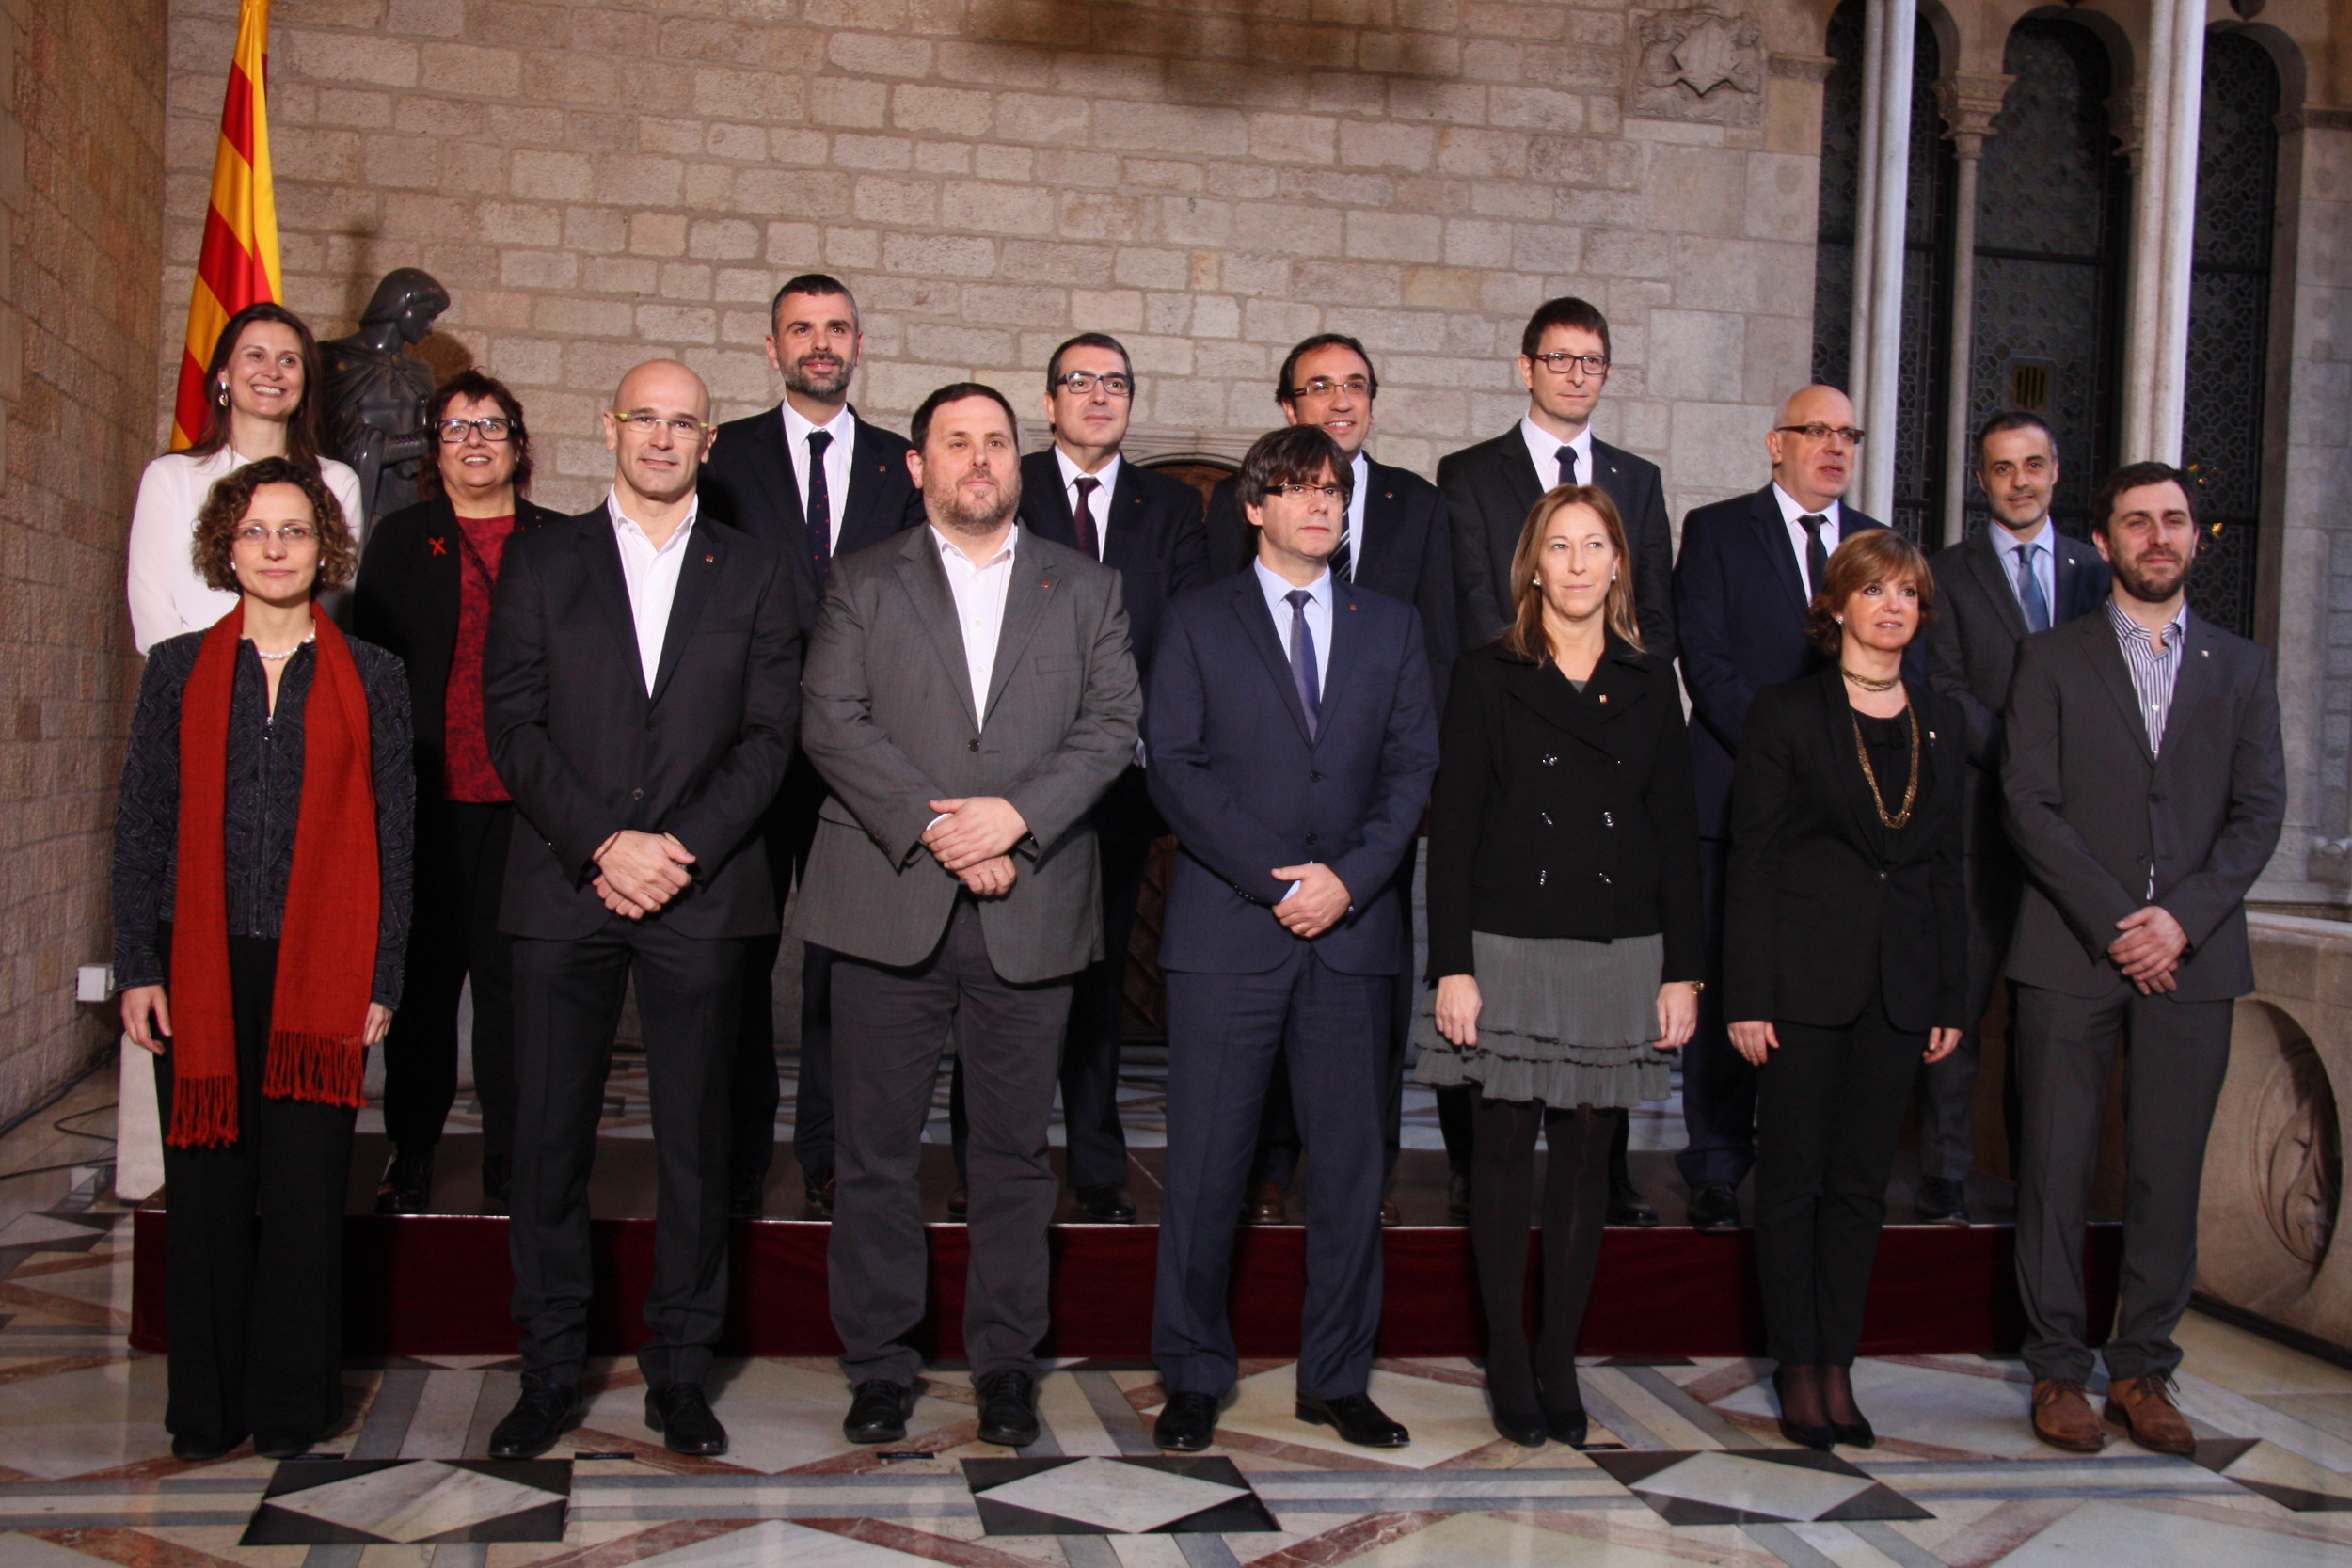 Image of the new Catalan Government, constituted today, with President Carles Puigdemont, Vice President and Catalan Minister for Economy, Oriol Junqueras, Catalan Minister for Presidency, Neus Munté and Catalan Minister for Foreign Affairs, Raül Romeva (